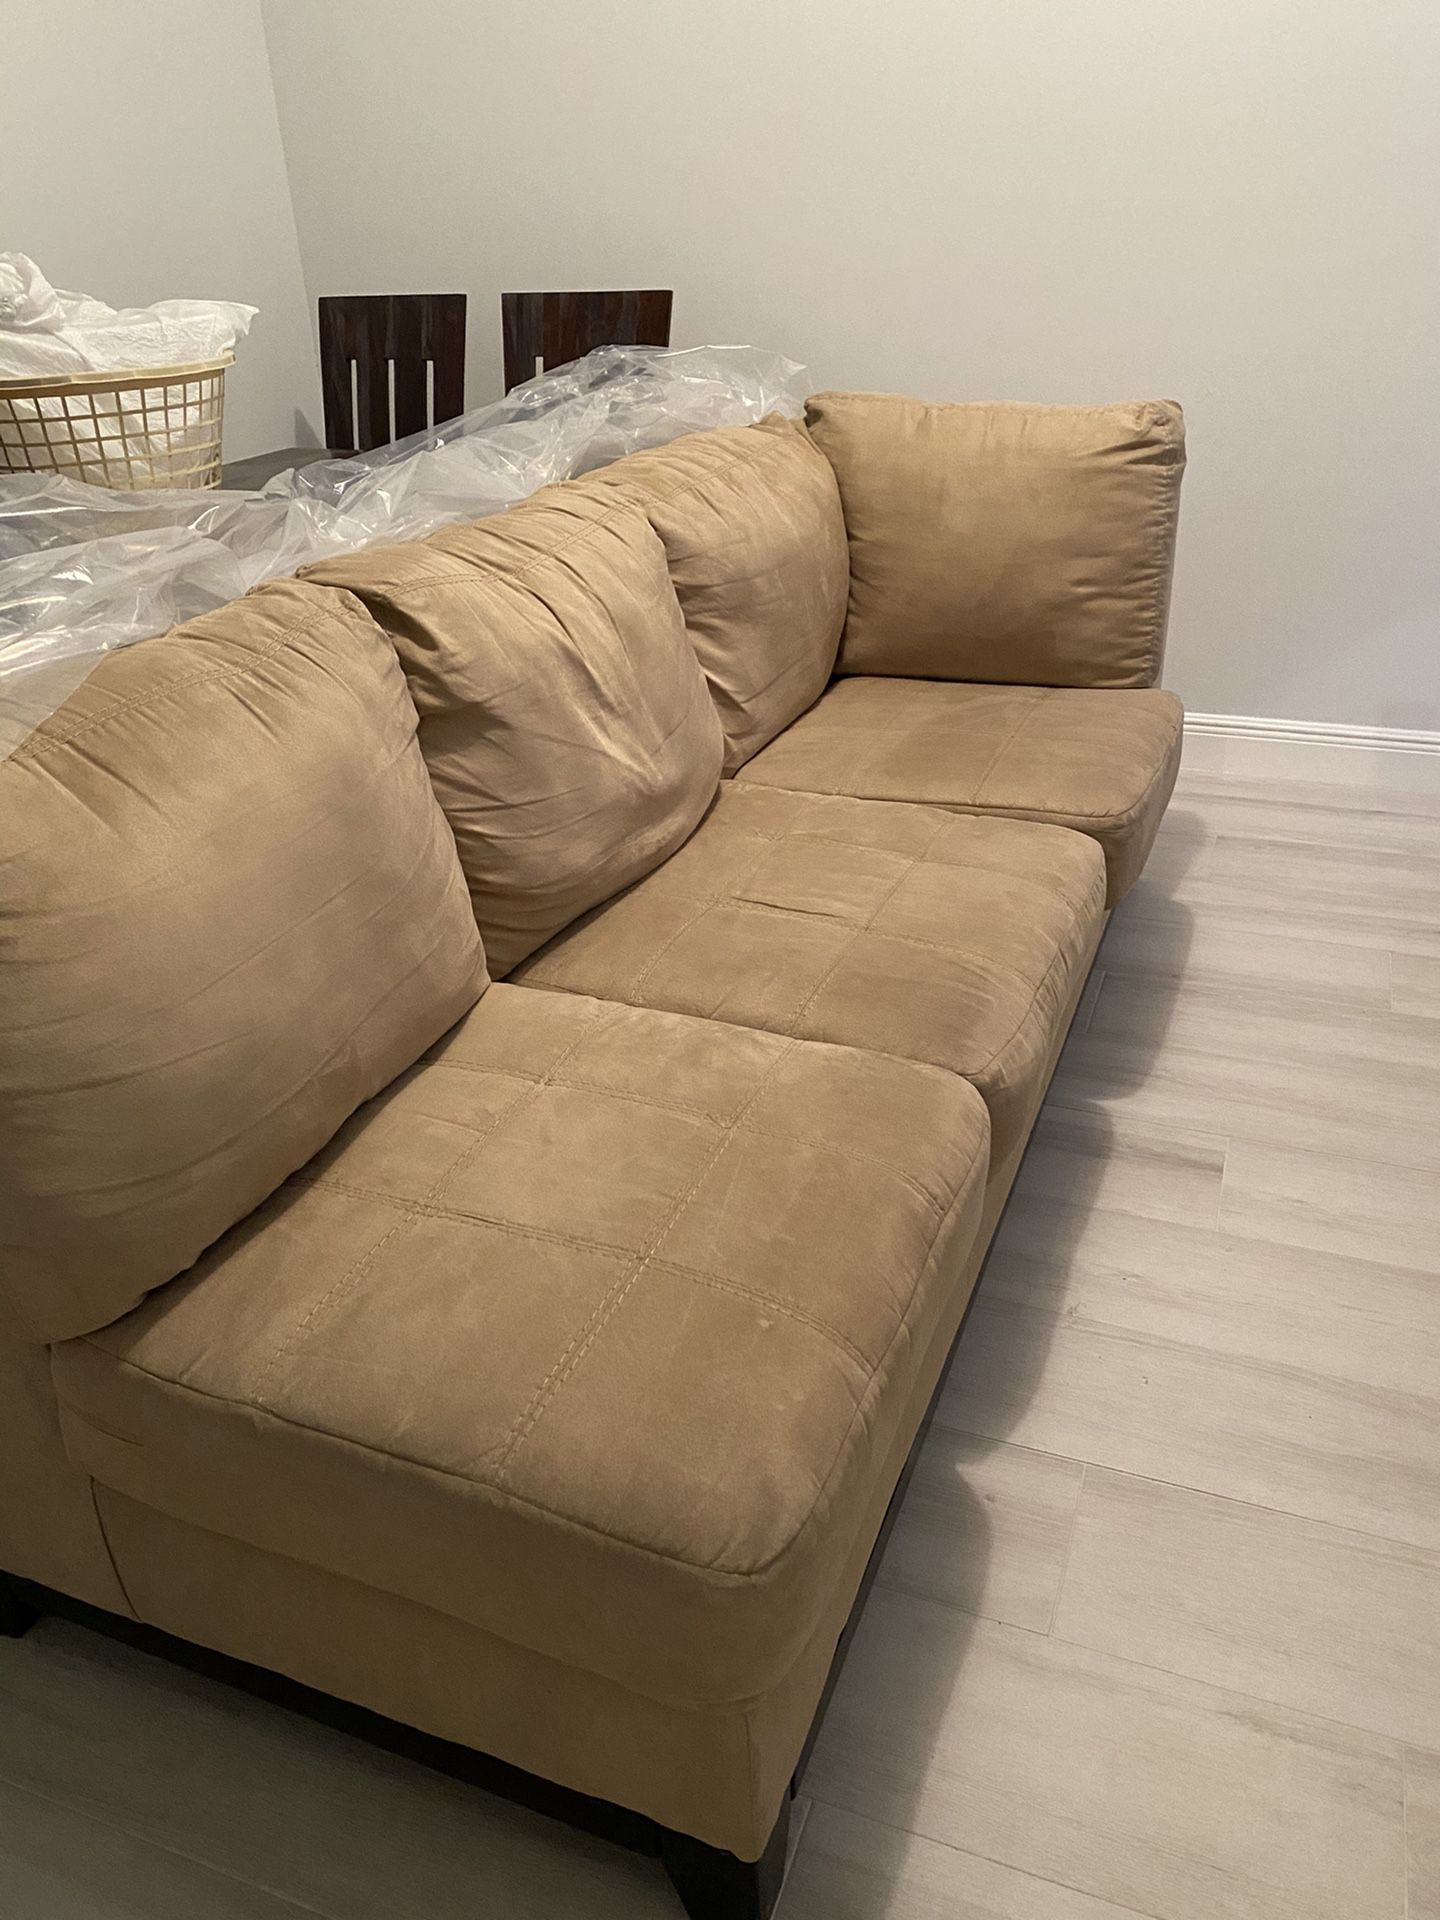 Sectional couch included with a square ottoman same color.